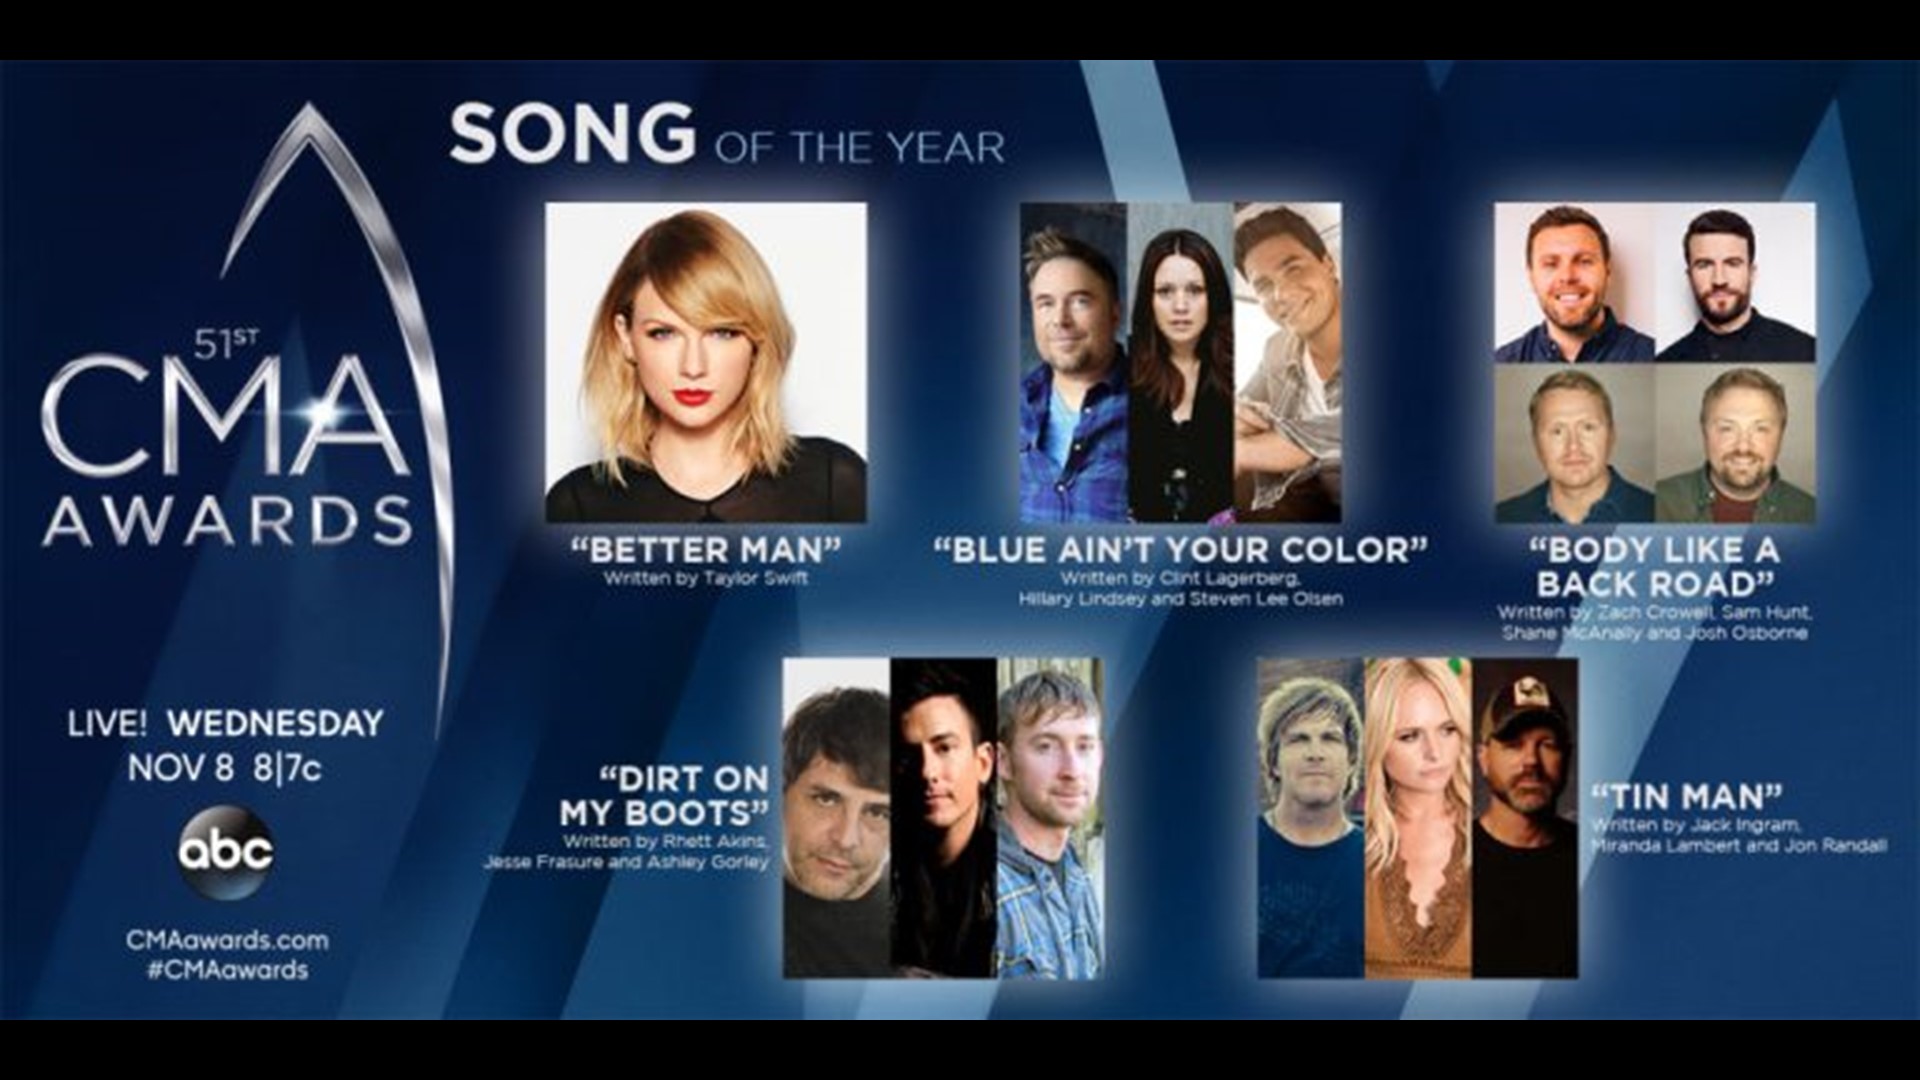 CMA Awards Song of the Year nominees